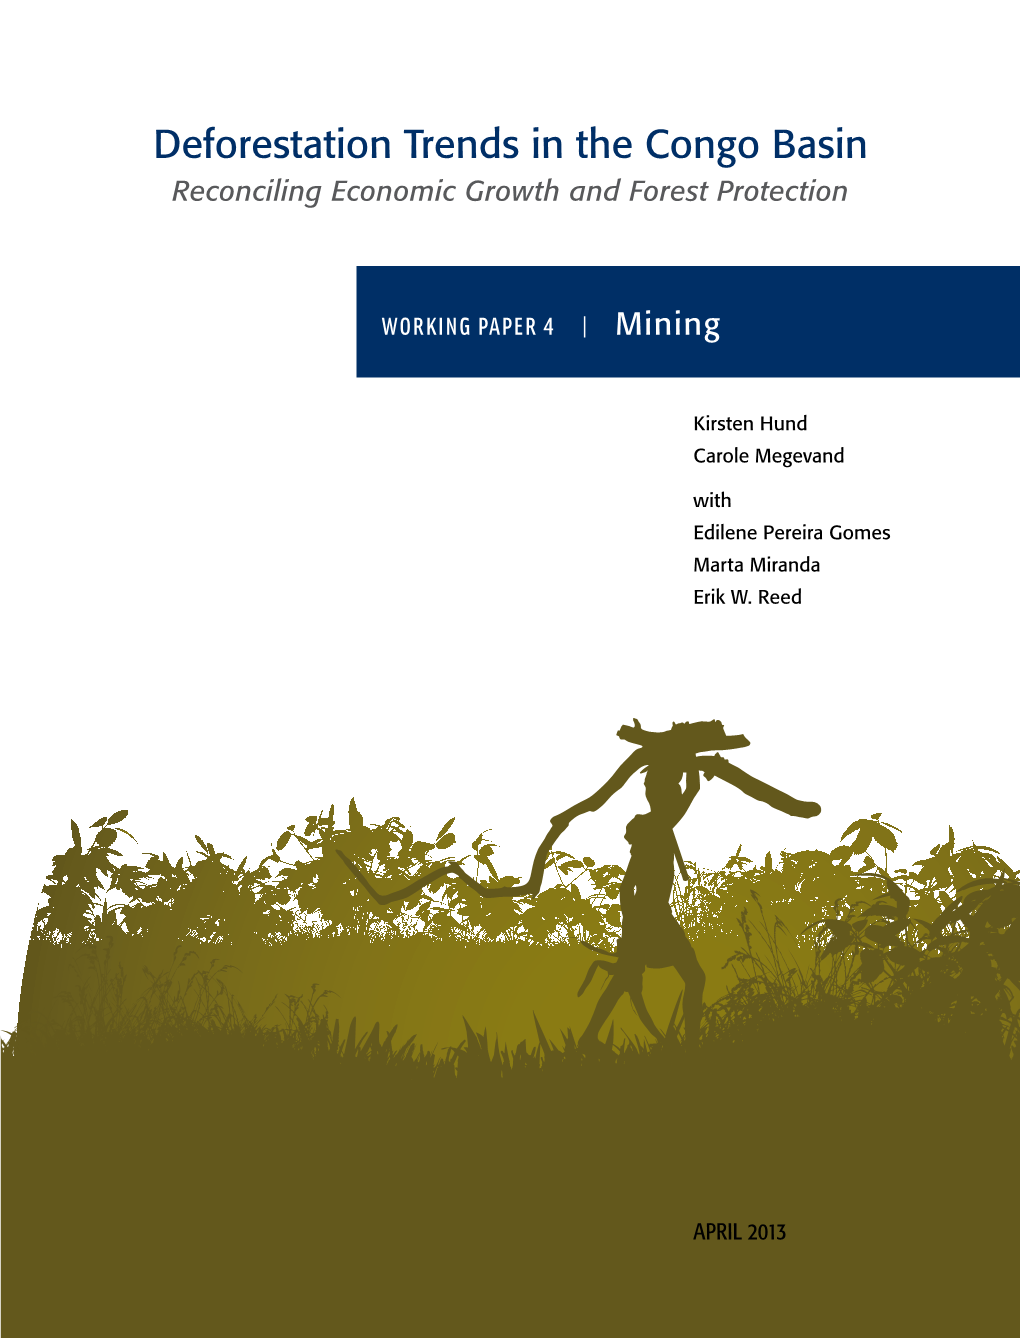 Deforestation Trends in the Congo Basin Reconciling Economic Growth and Forest Protection